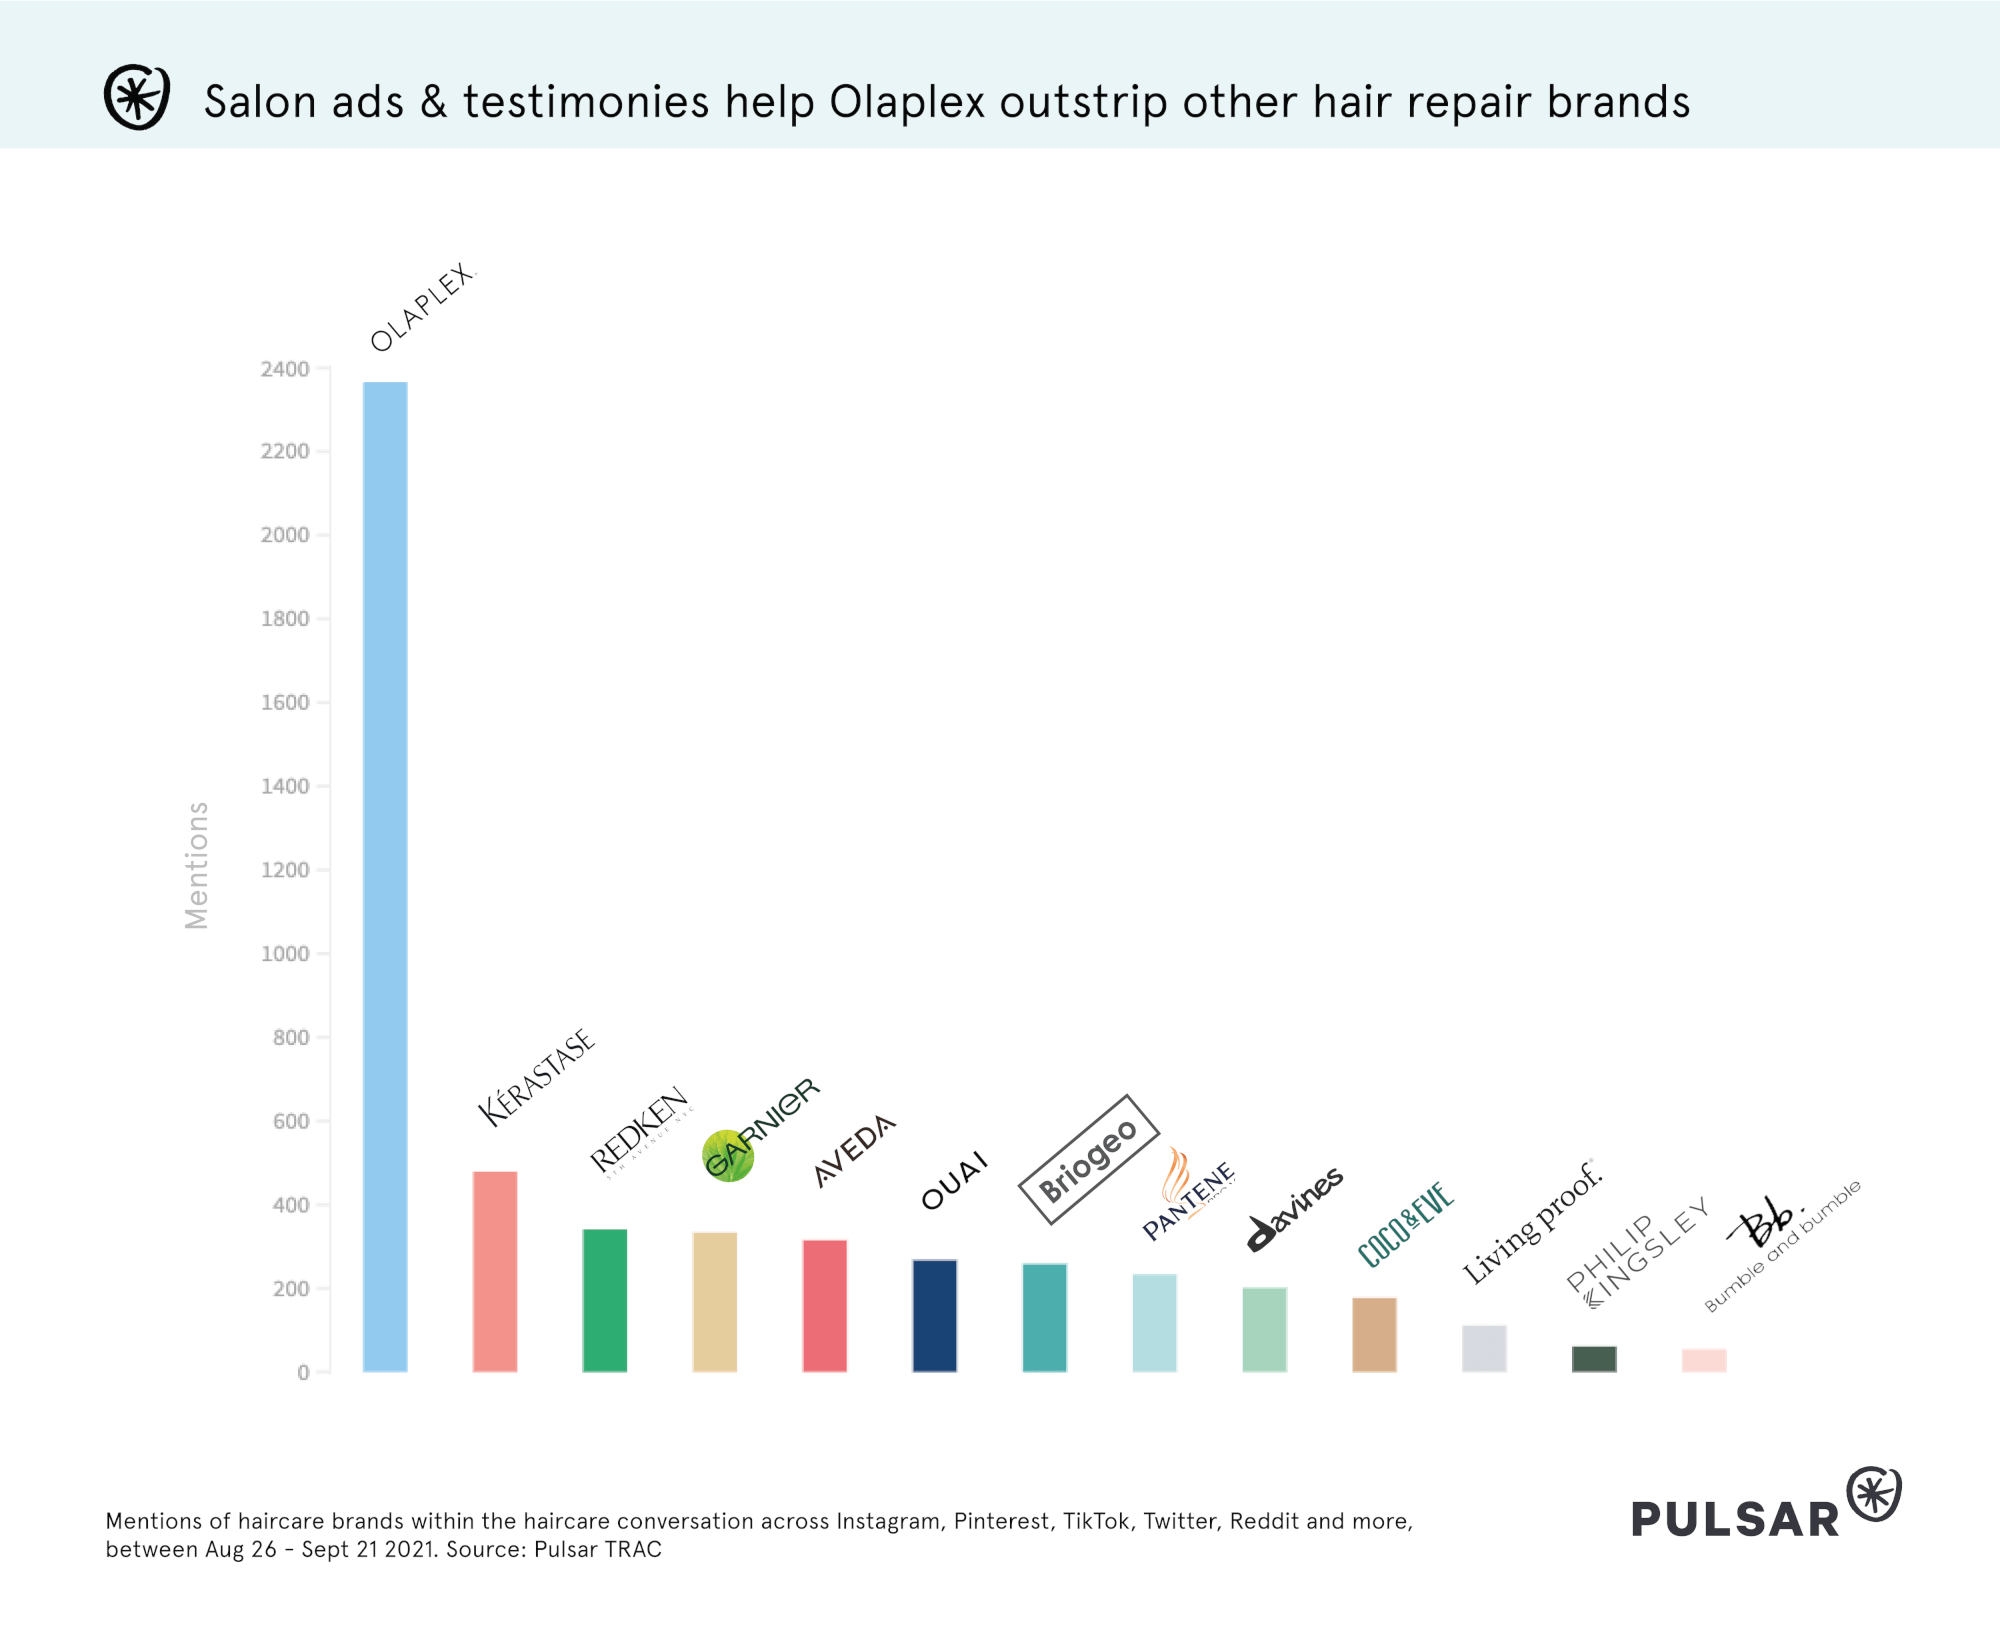 Olaplex the most-mentioned brand by some distance